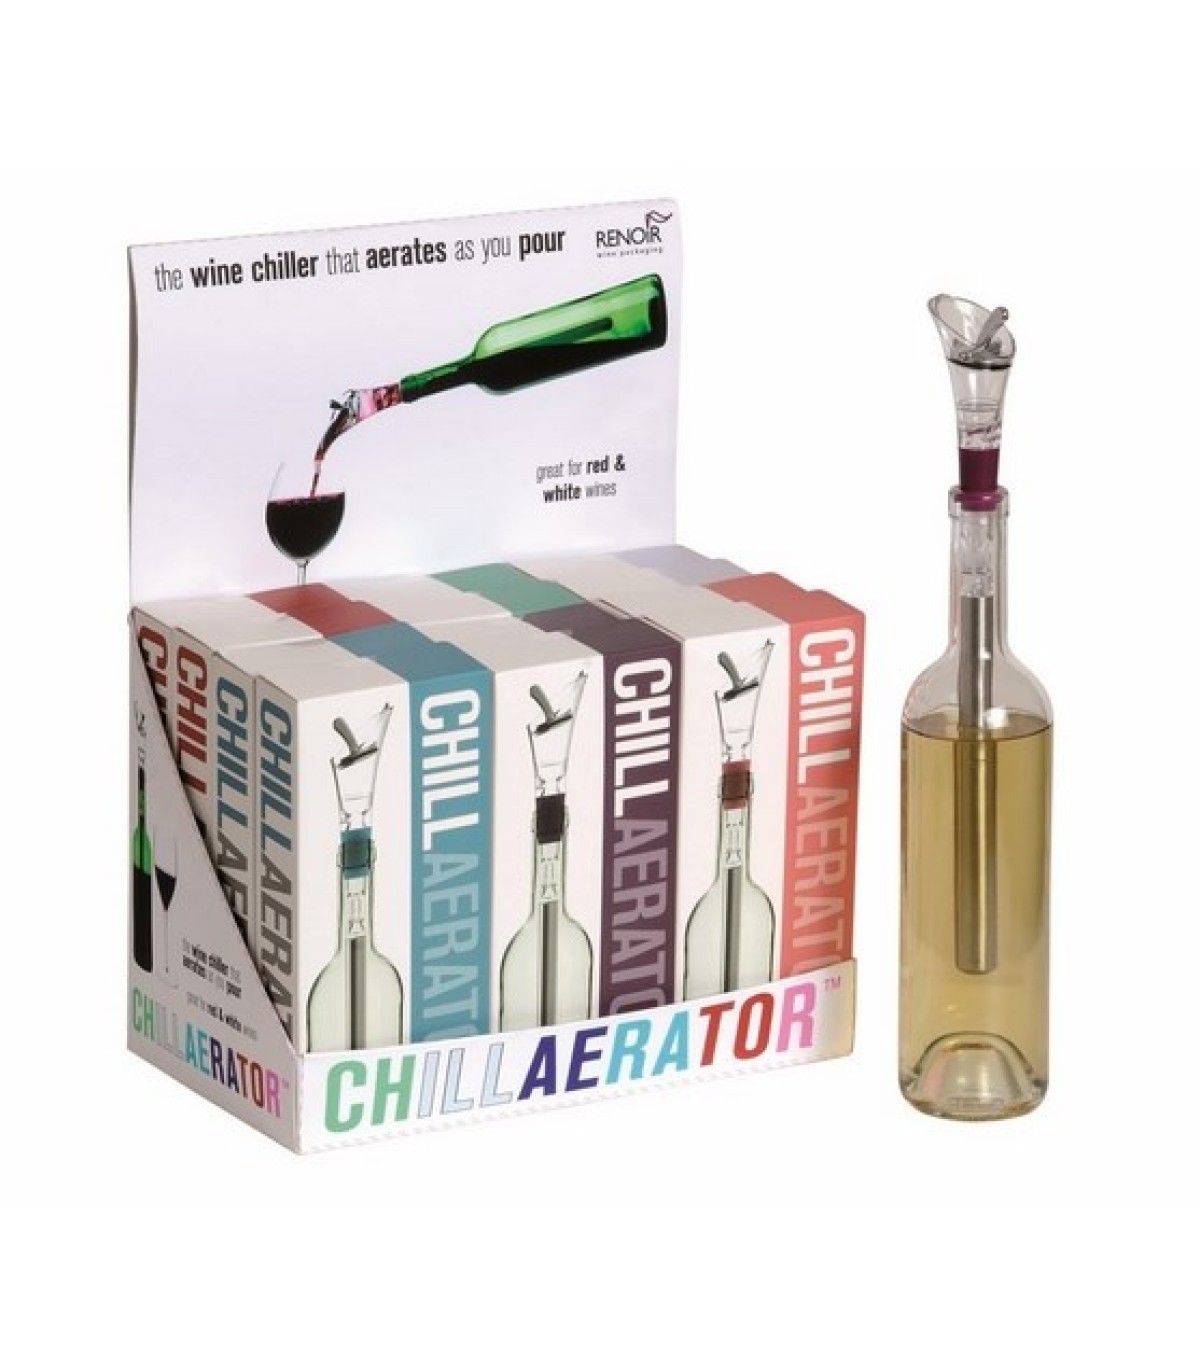 Refrigerate, Oxygenates, Pour it, and Stop with the Chill aerator for wine